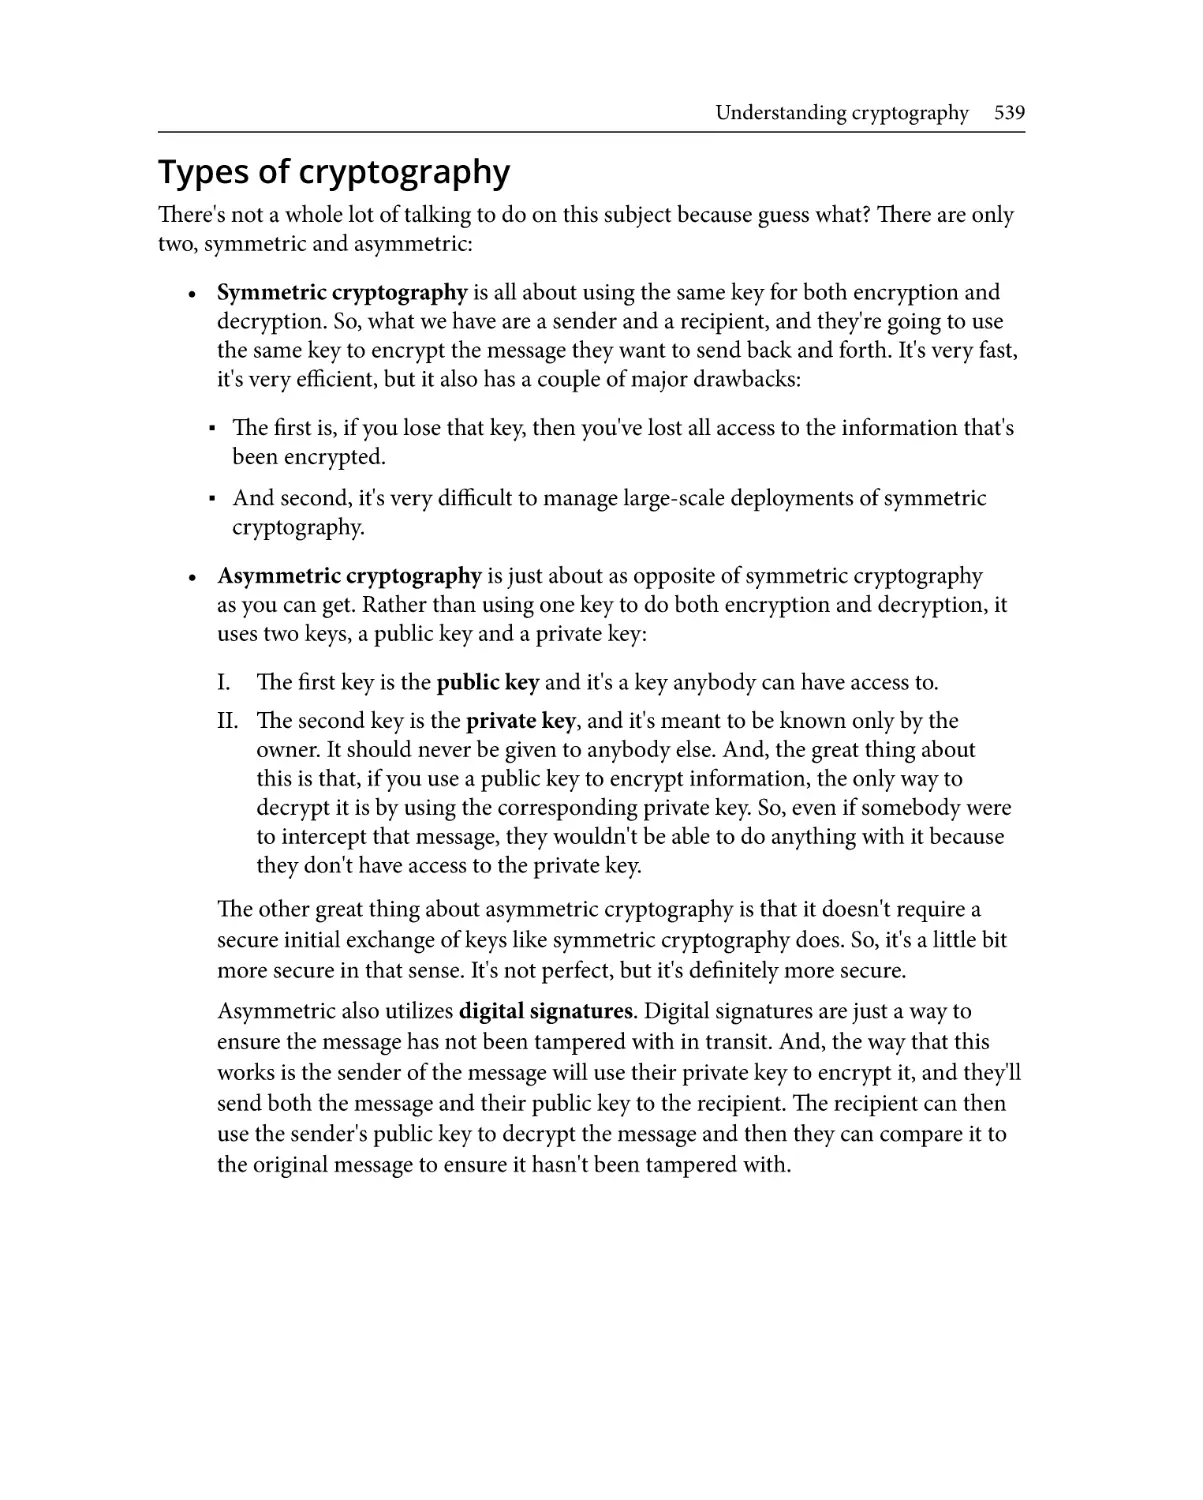 Types of cryptography